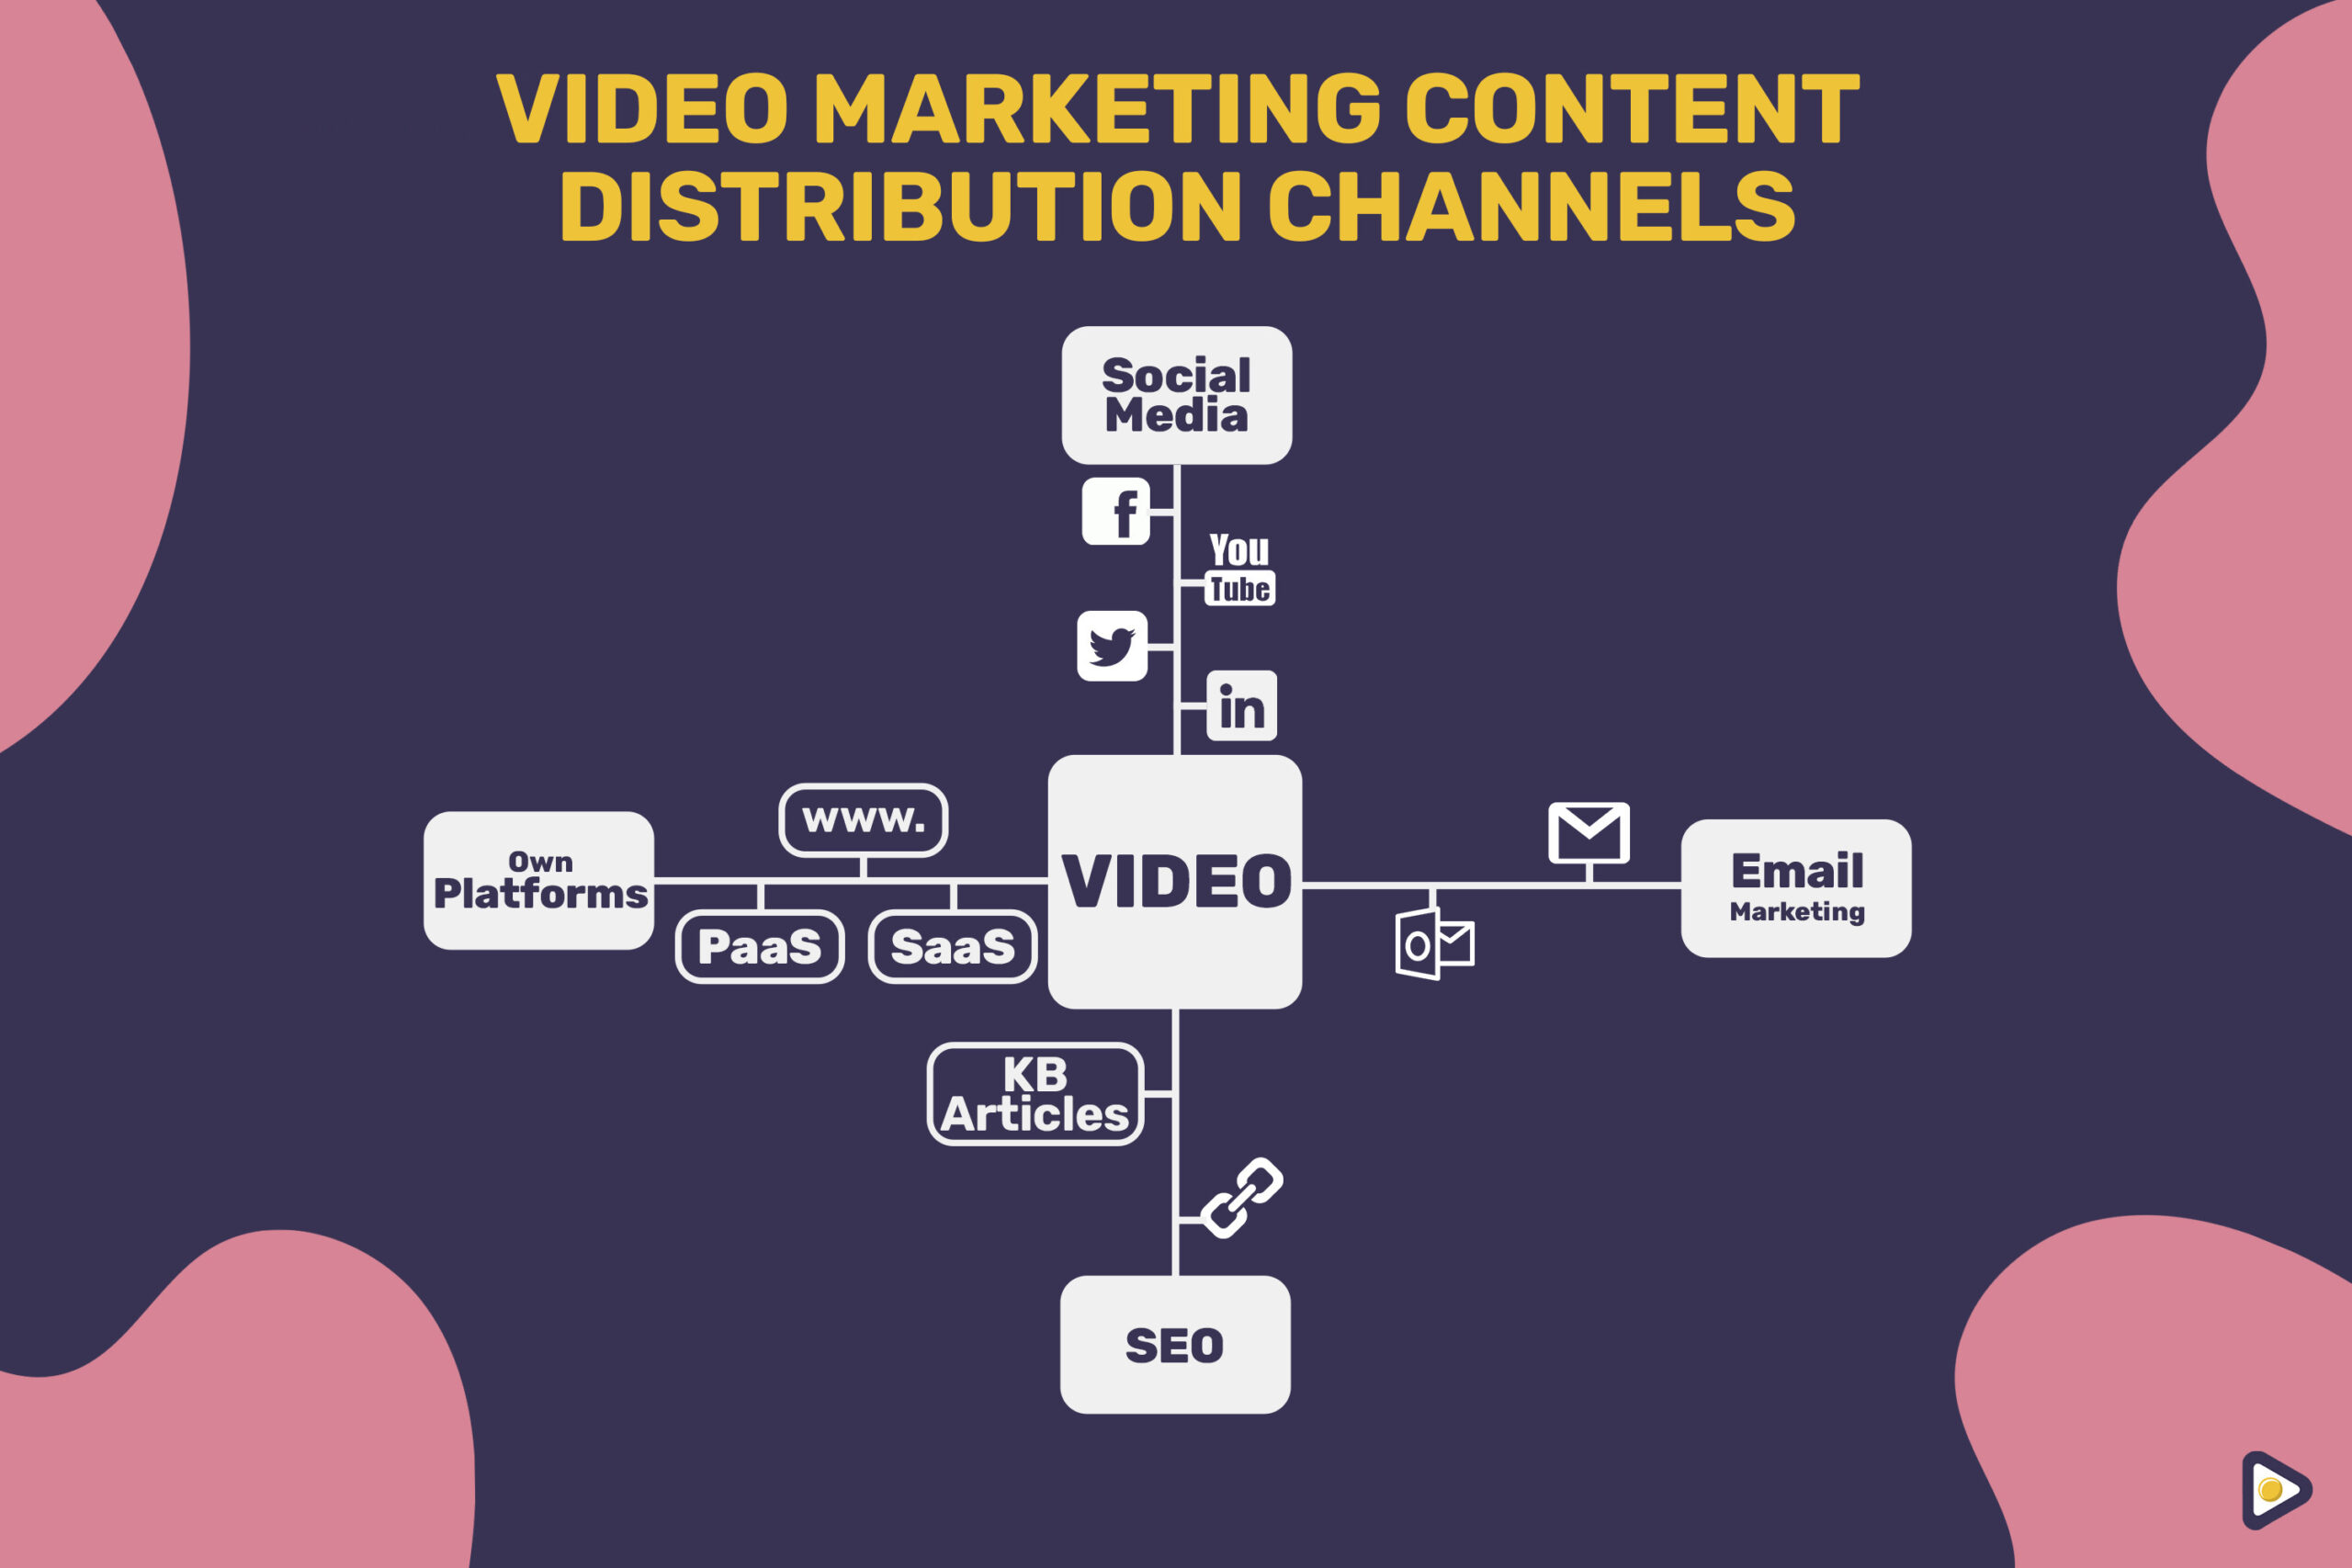 How to Develop a Video Marketing Strategy